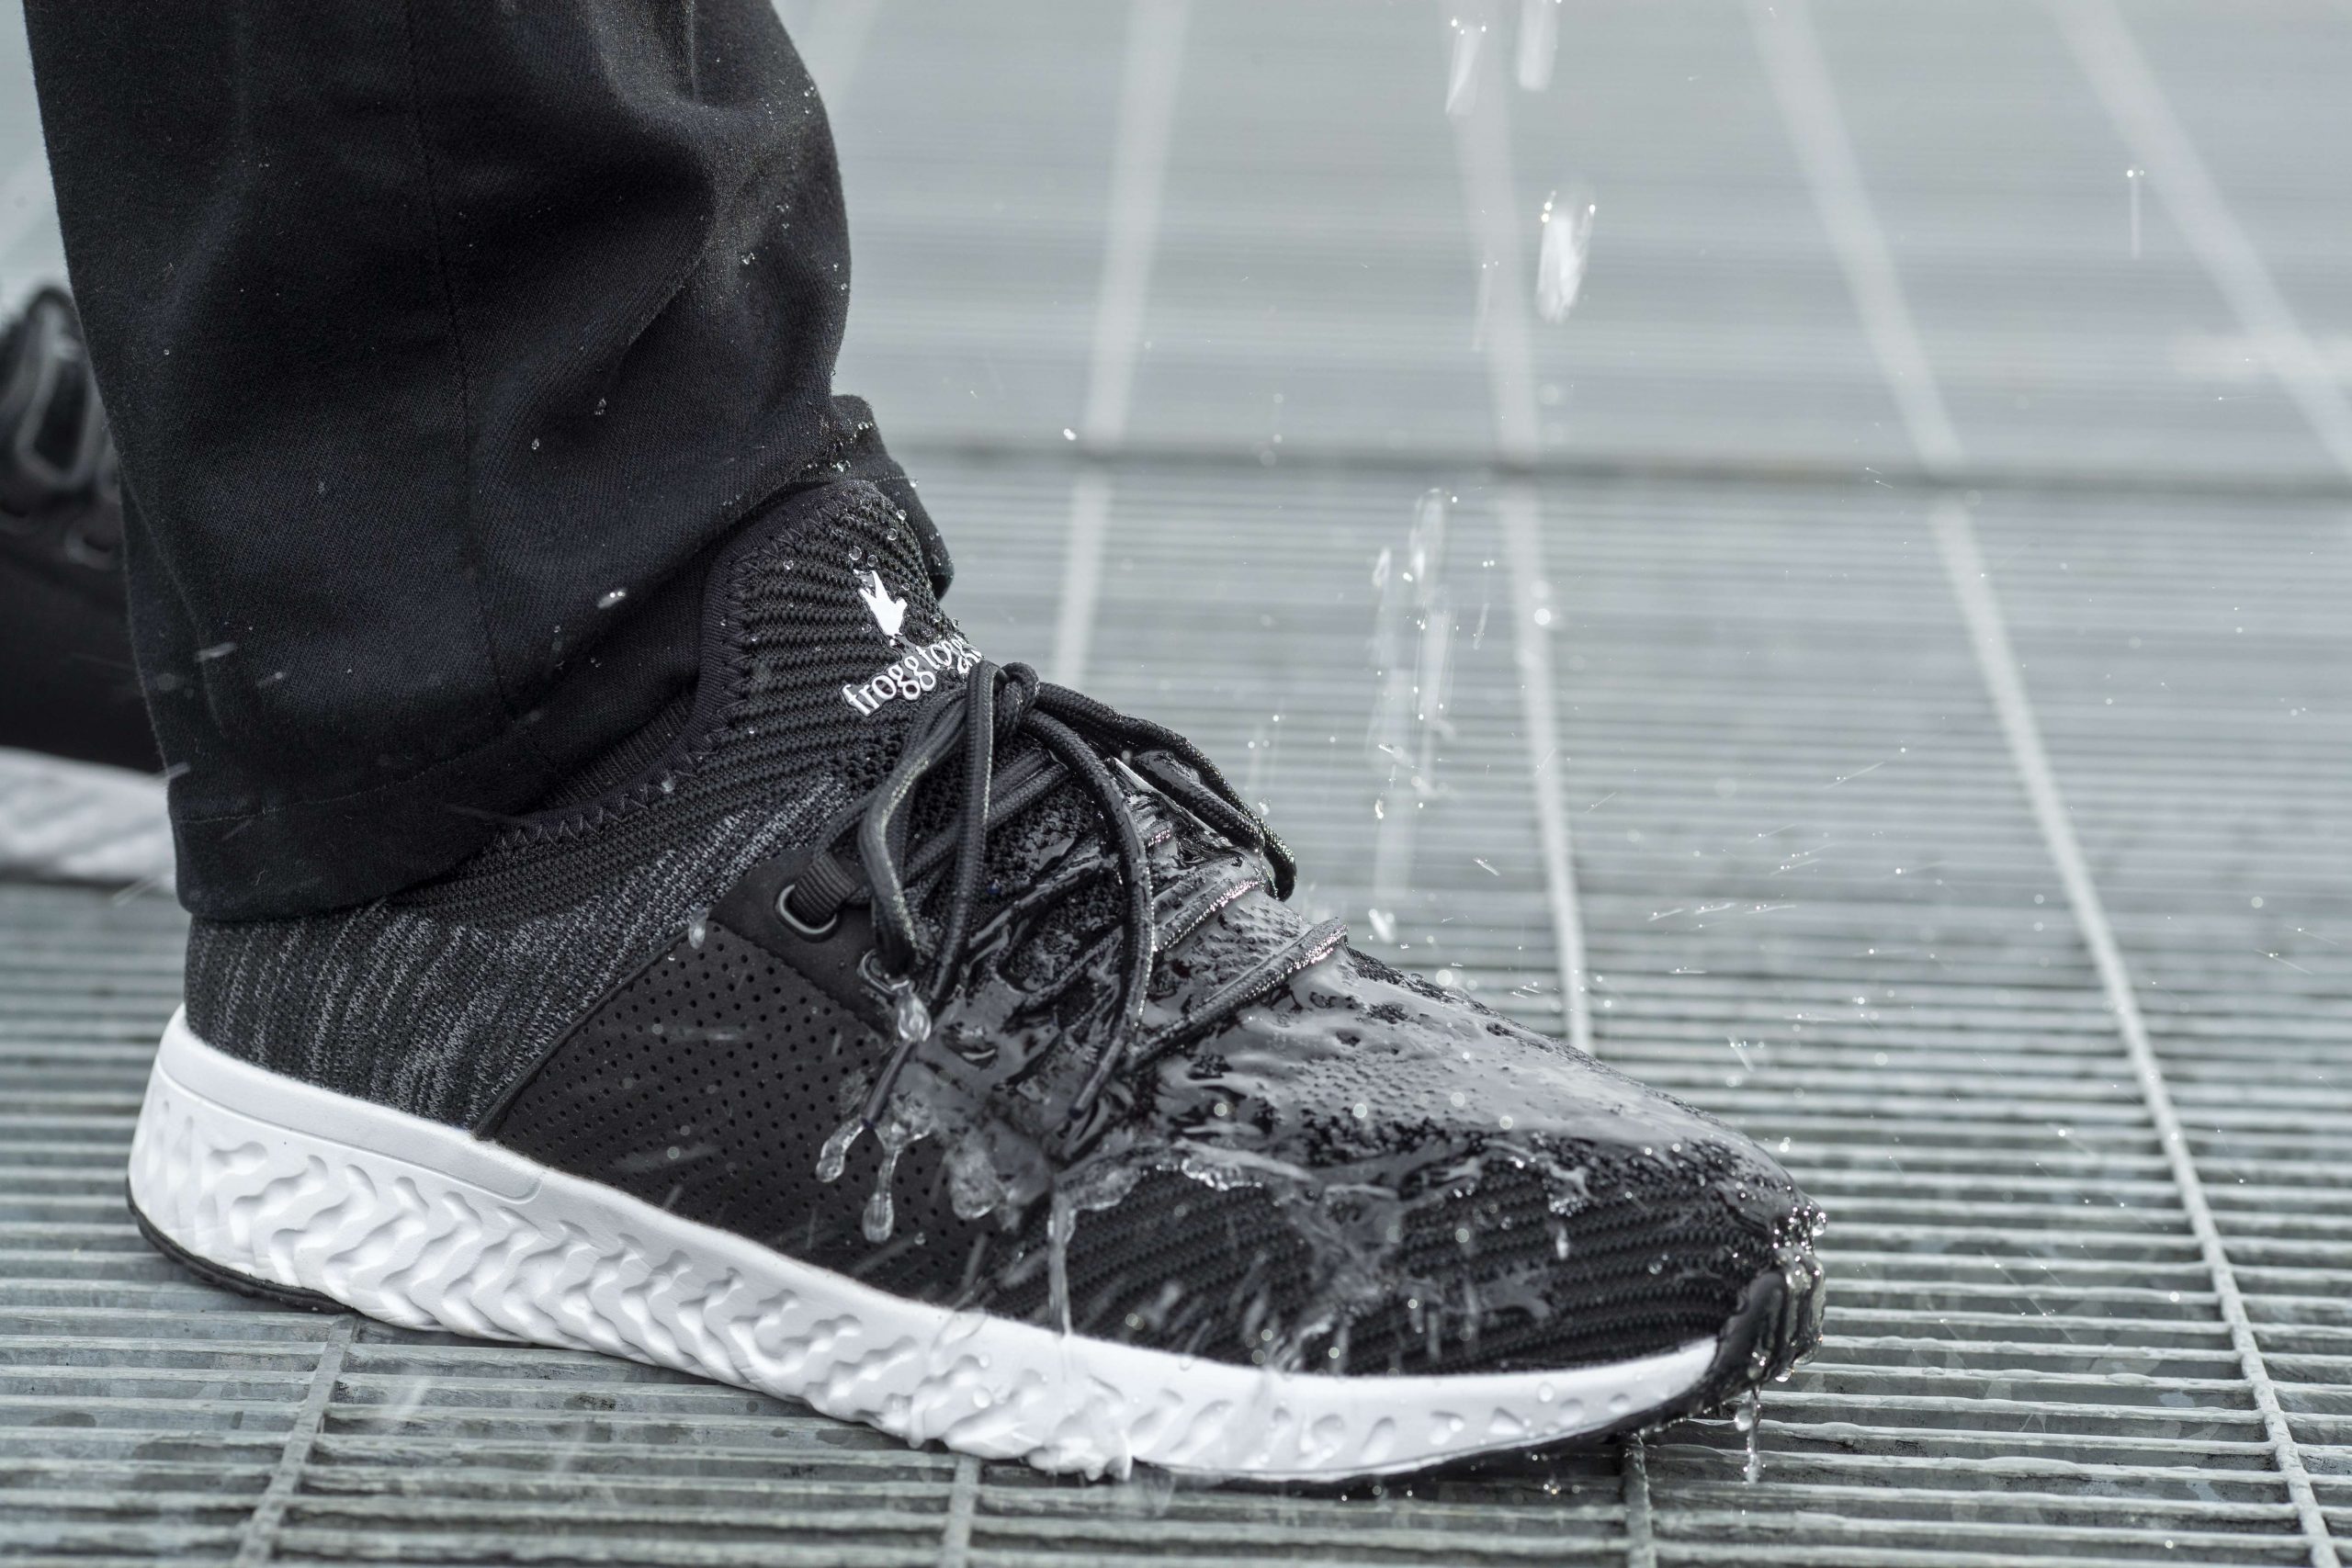 Waterproof breathable knit uppers feature Osmotic Technology, keeping your feet dry without suffocating them. The non-marking outsoles are equipped with strategic rubber grip inserts to keep you steady on your feet, even on slippery or wet surfaces like docks and boat decks.